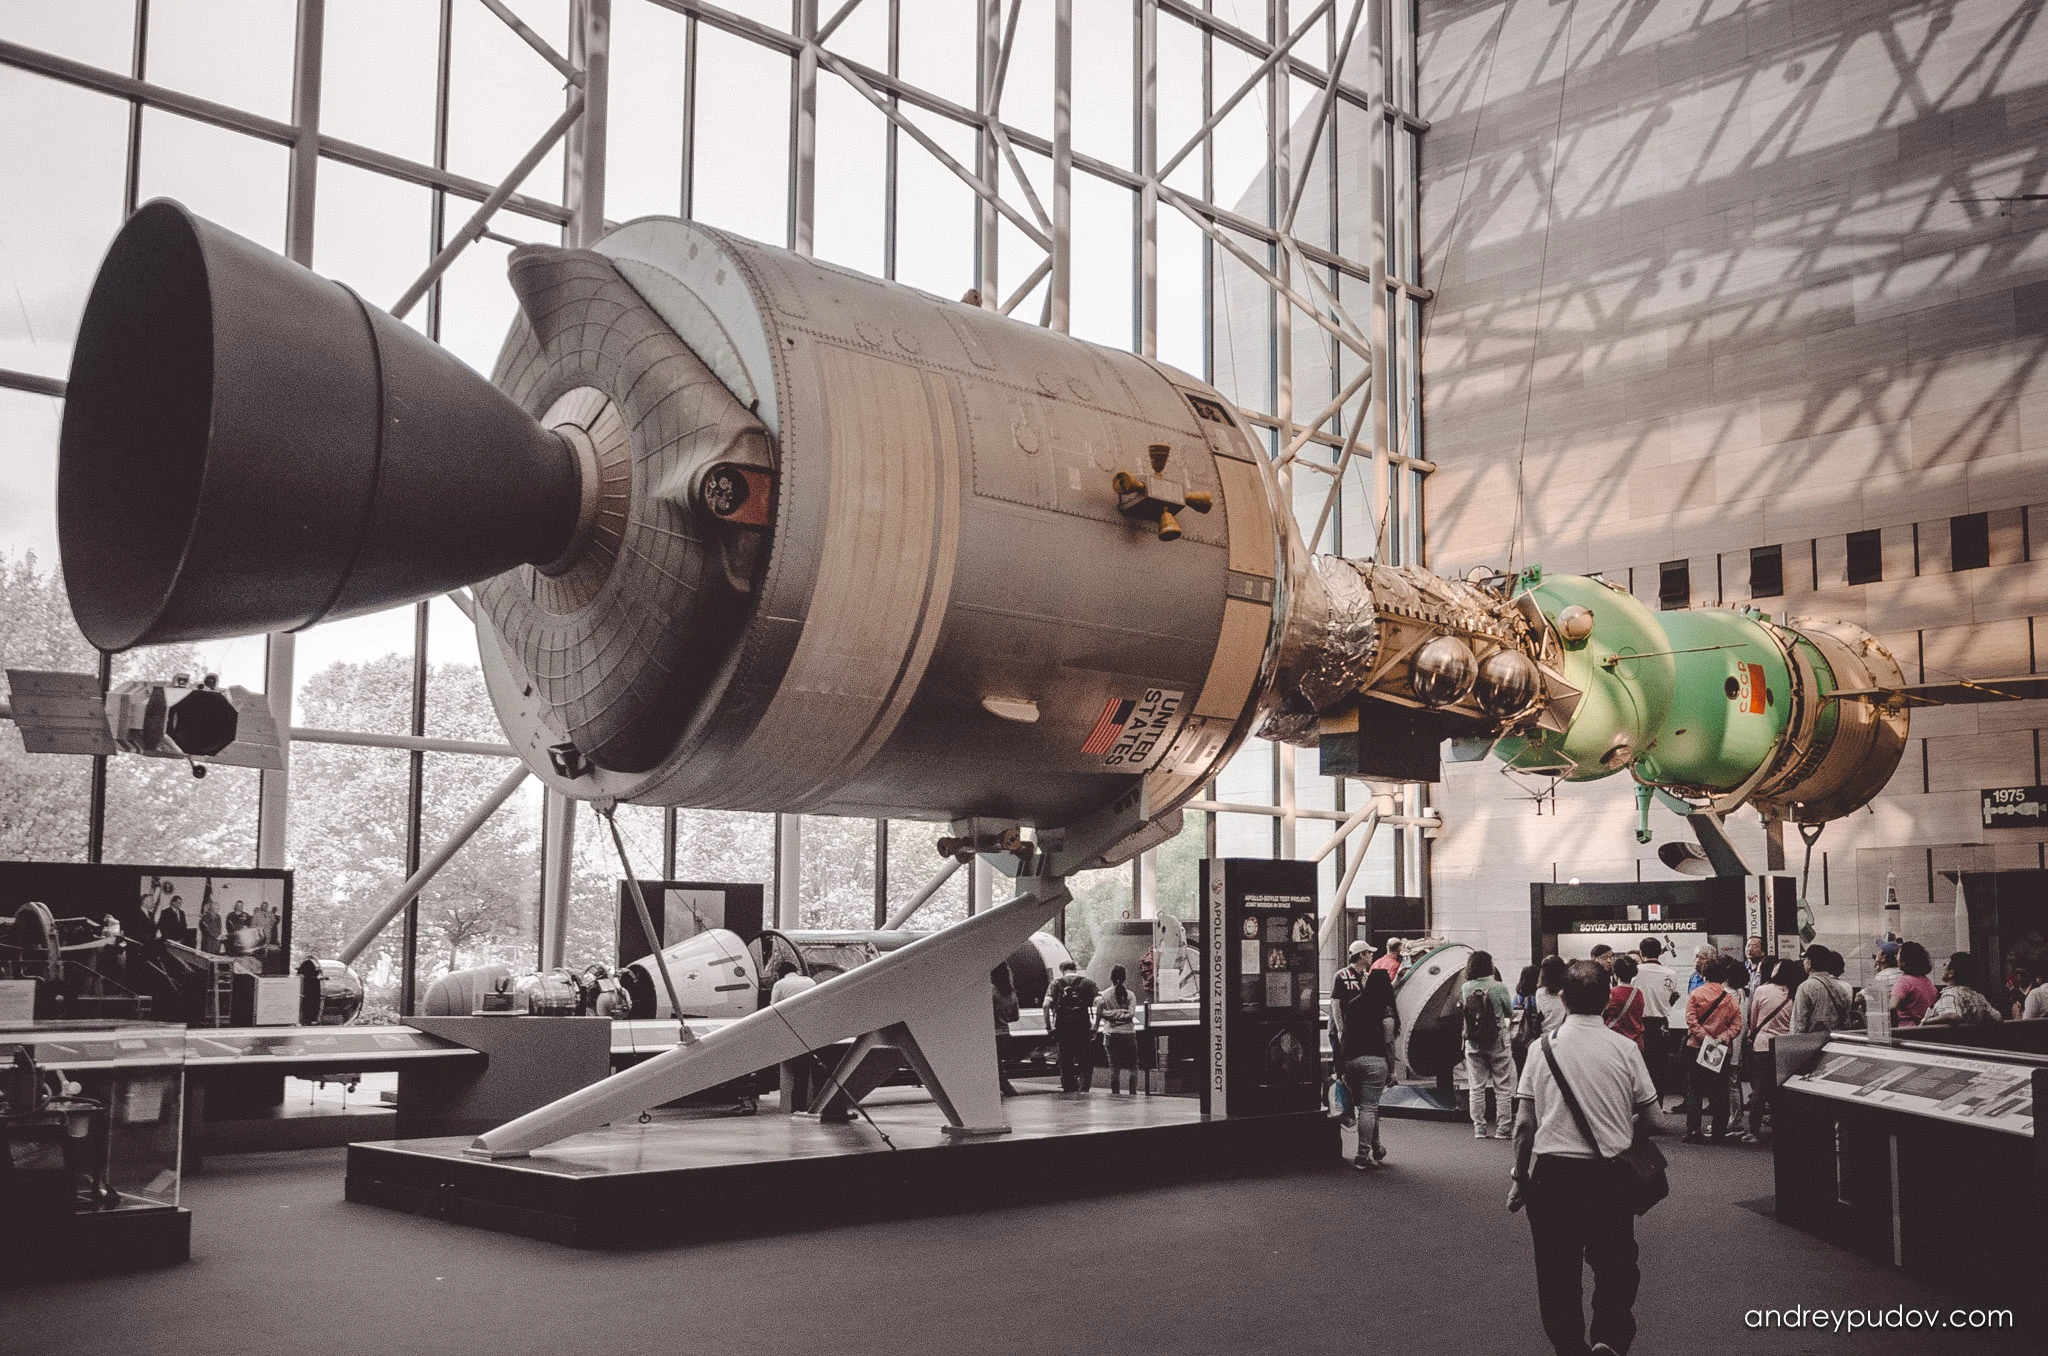 Apollo–Soyuz

Apollo–Soyuz was the first crewed international space mission, carried out jointly by the Soviet Union and the United States in July 1975. Millions of people around the world watched on television as a Soviet Union Soyuz capsule docked with a United States Apollo spacecraft. The project, and its memorable handshake in space, was a symbol of détente between the two superpowers during the Cold War, and it is generally considered to mark the end of the Space Race, which had begun in 1957 with the Soviet Union's launch of Sputnik 1.